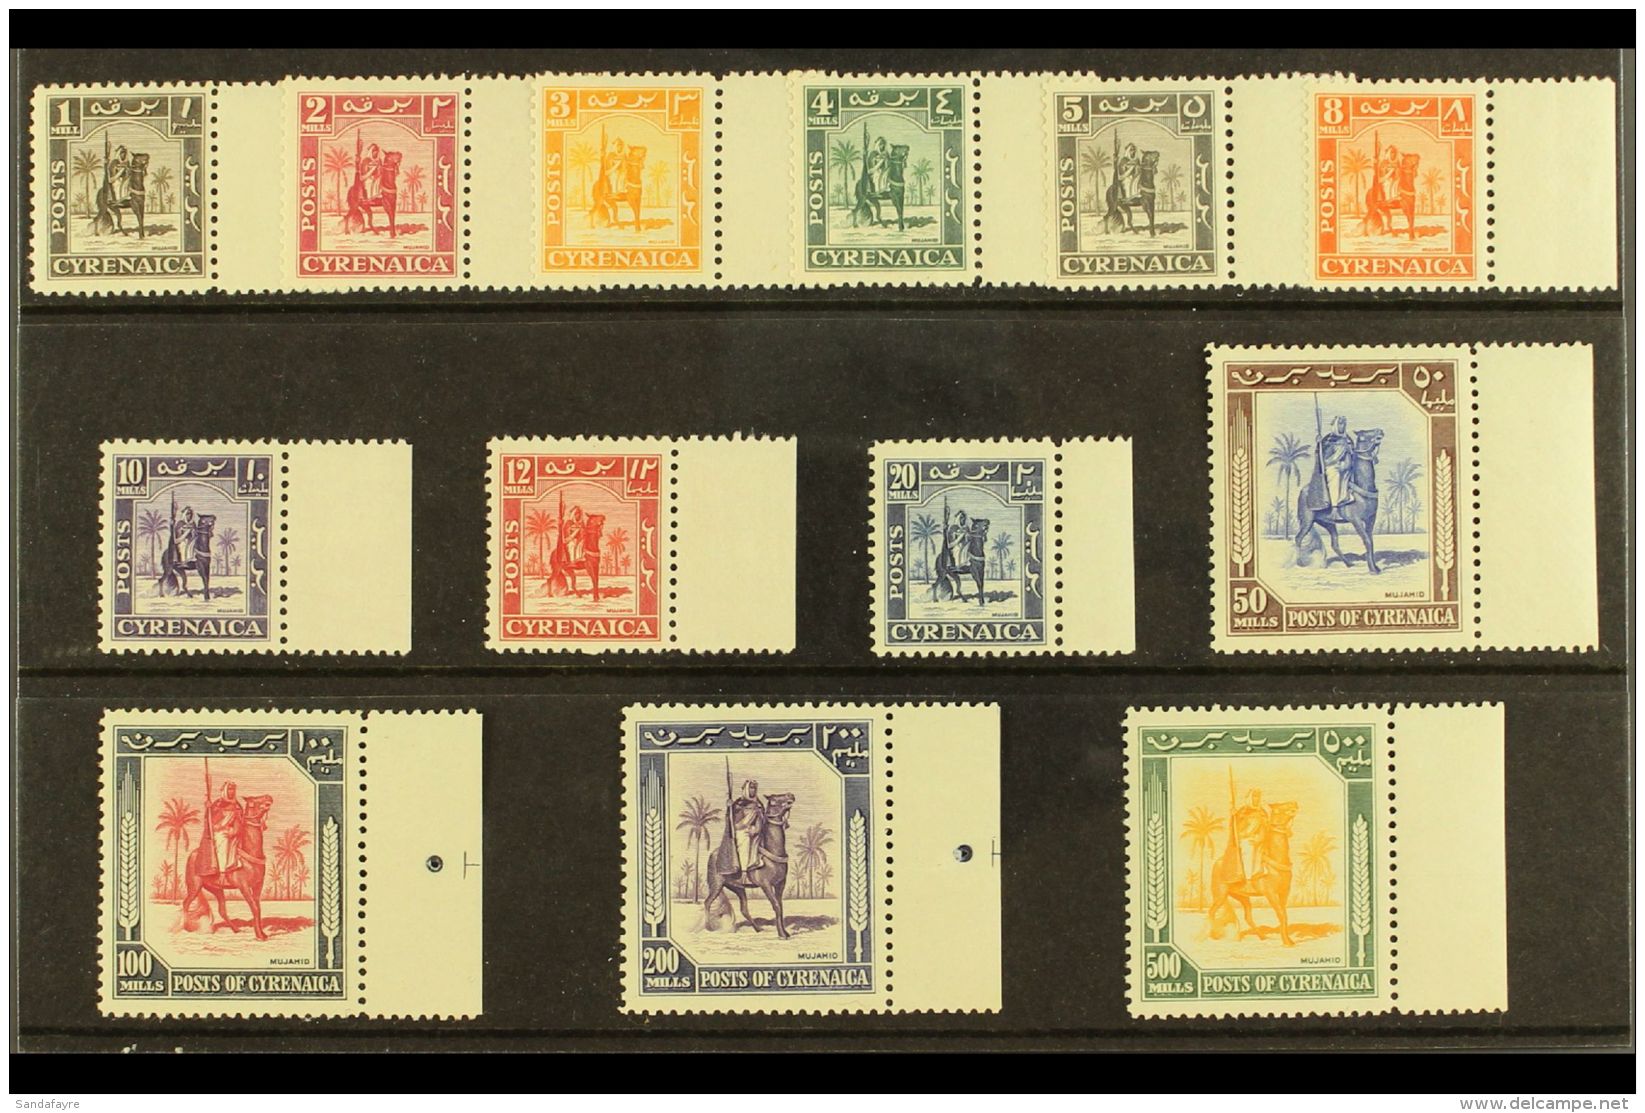 CYRENAICA 1950 "Mounted Warrior" Definitives Complete Set, SG 136/48, Very Fine Never Hinged Mint Matching... - Afrique Orientale Italienne